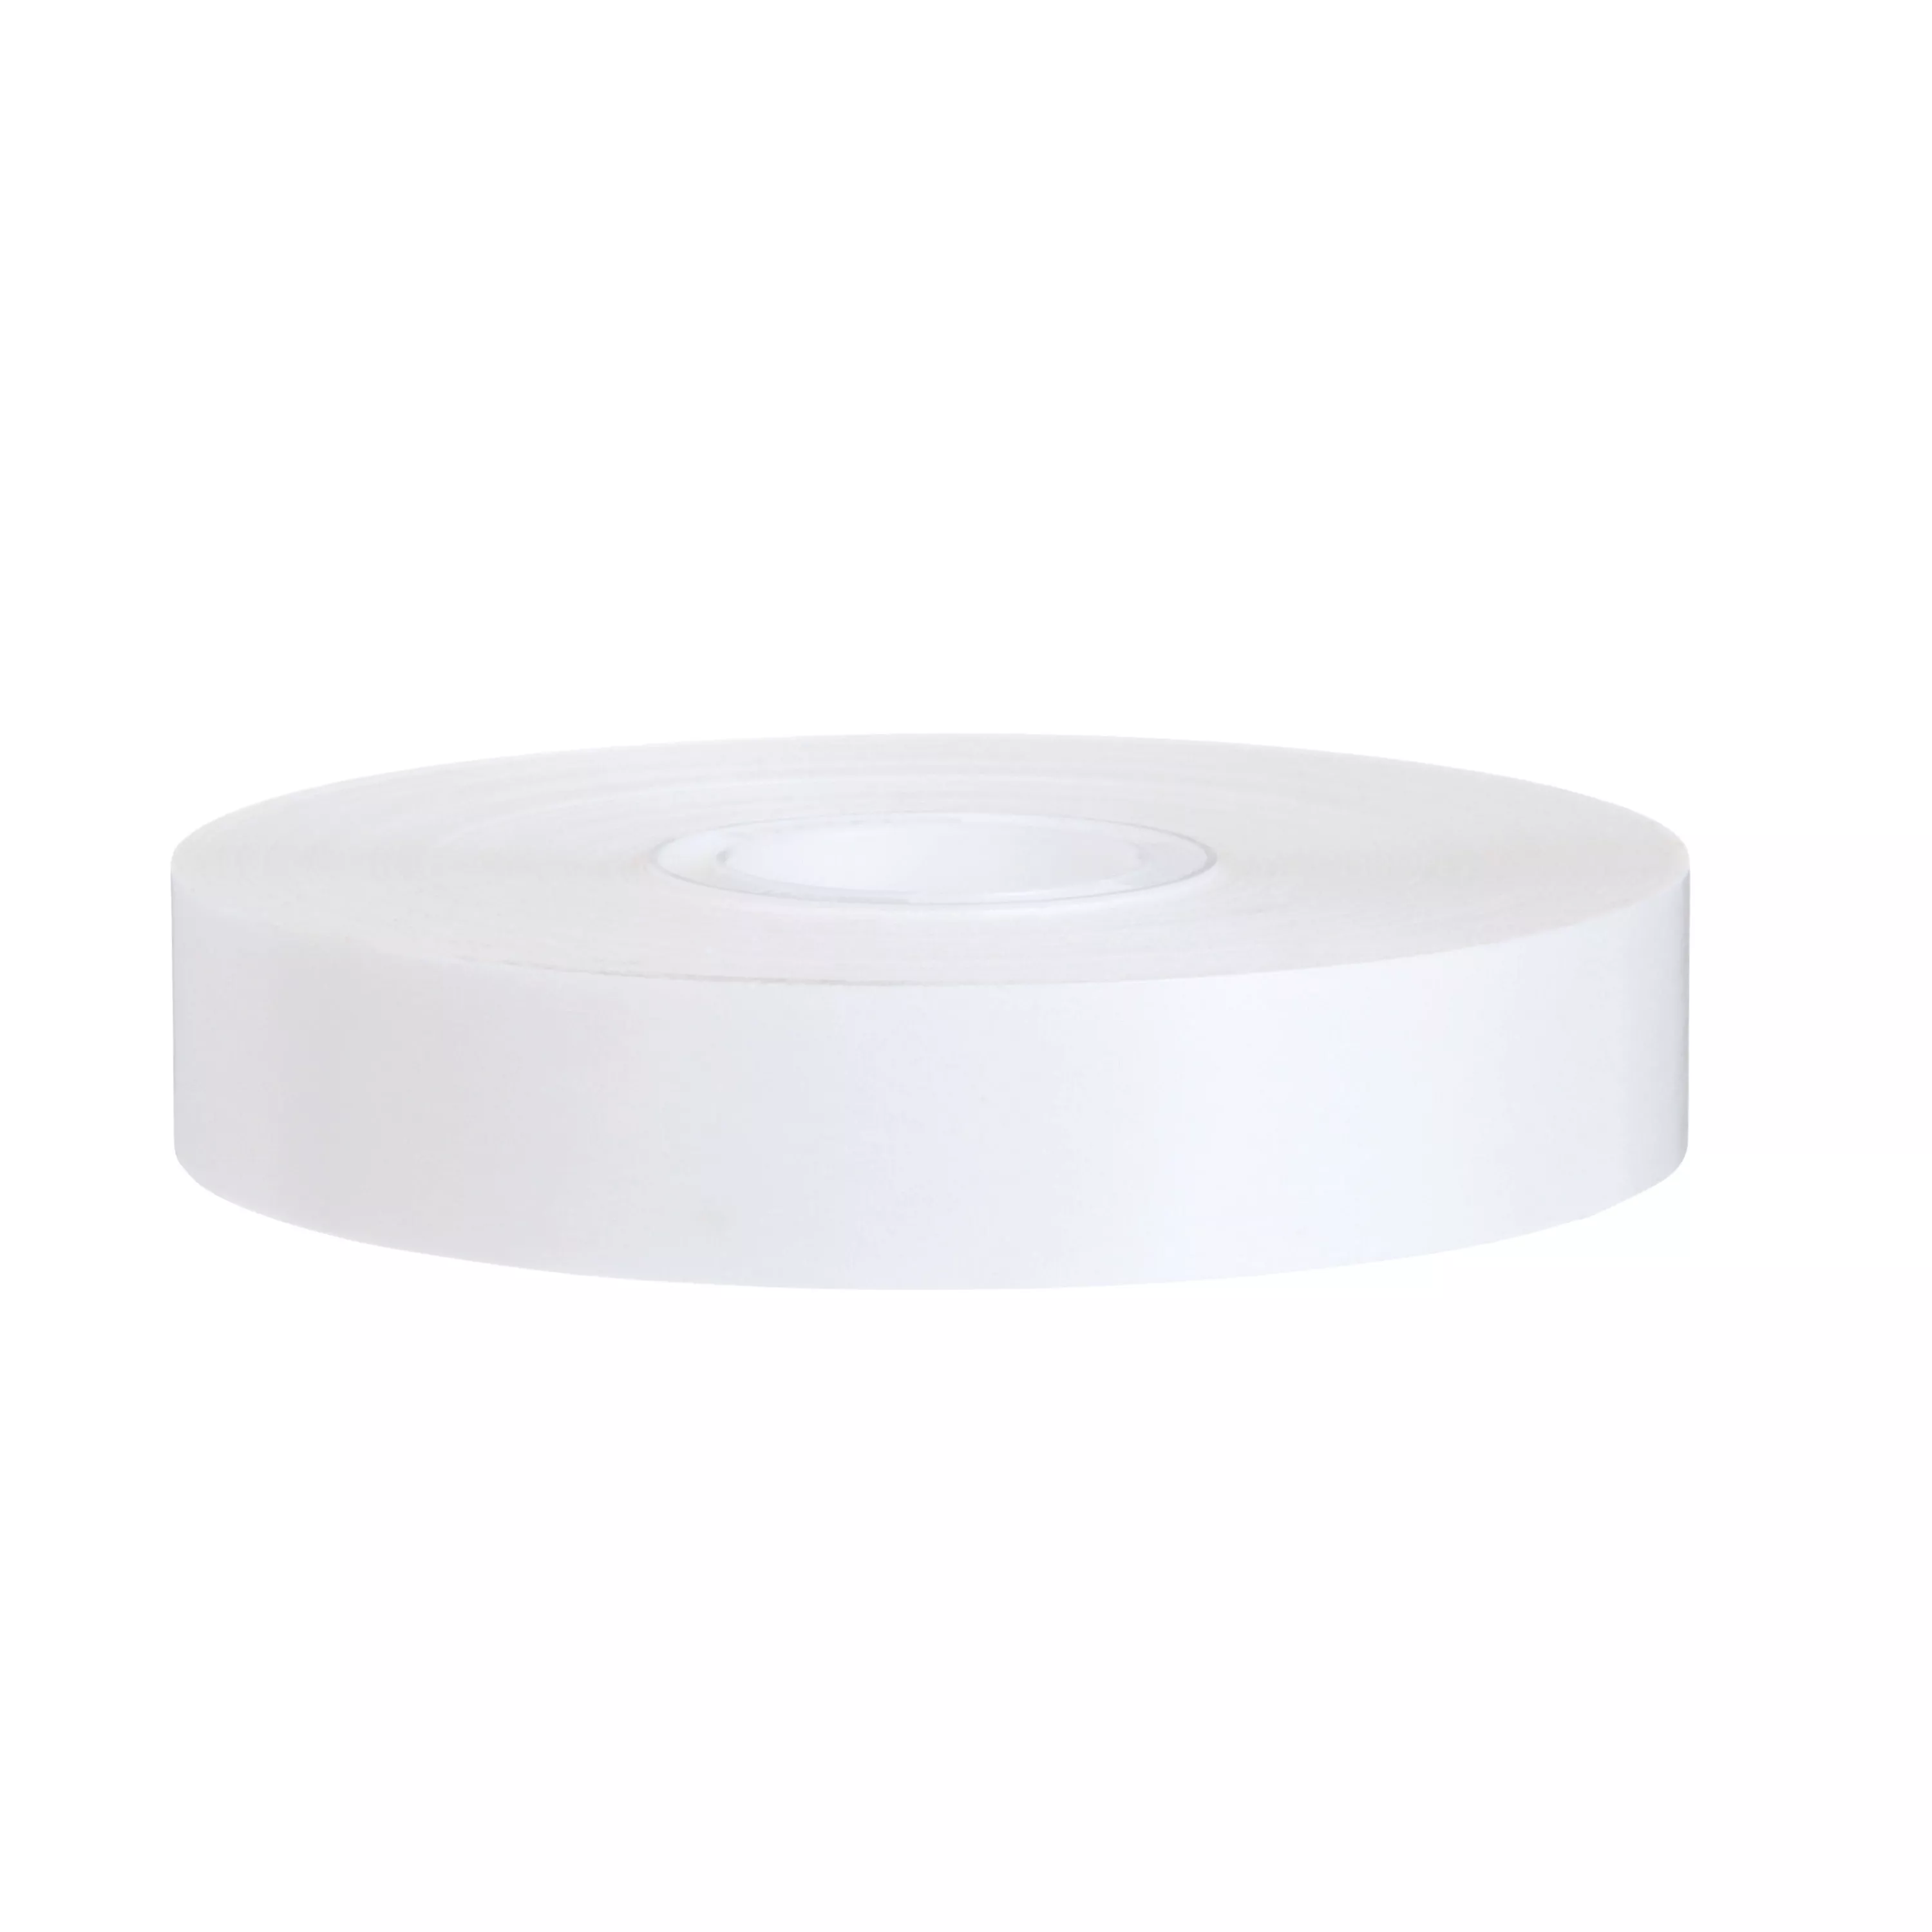 SKU 7000123437 | Scotch® ATG Repositionable Double Coated Tissue Tape 928